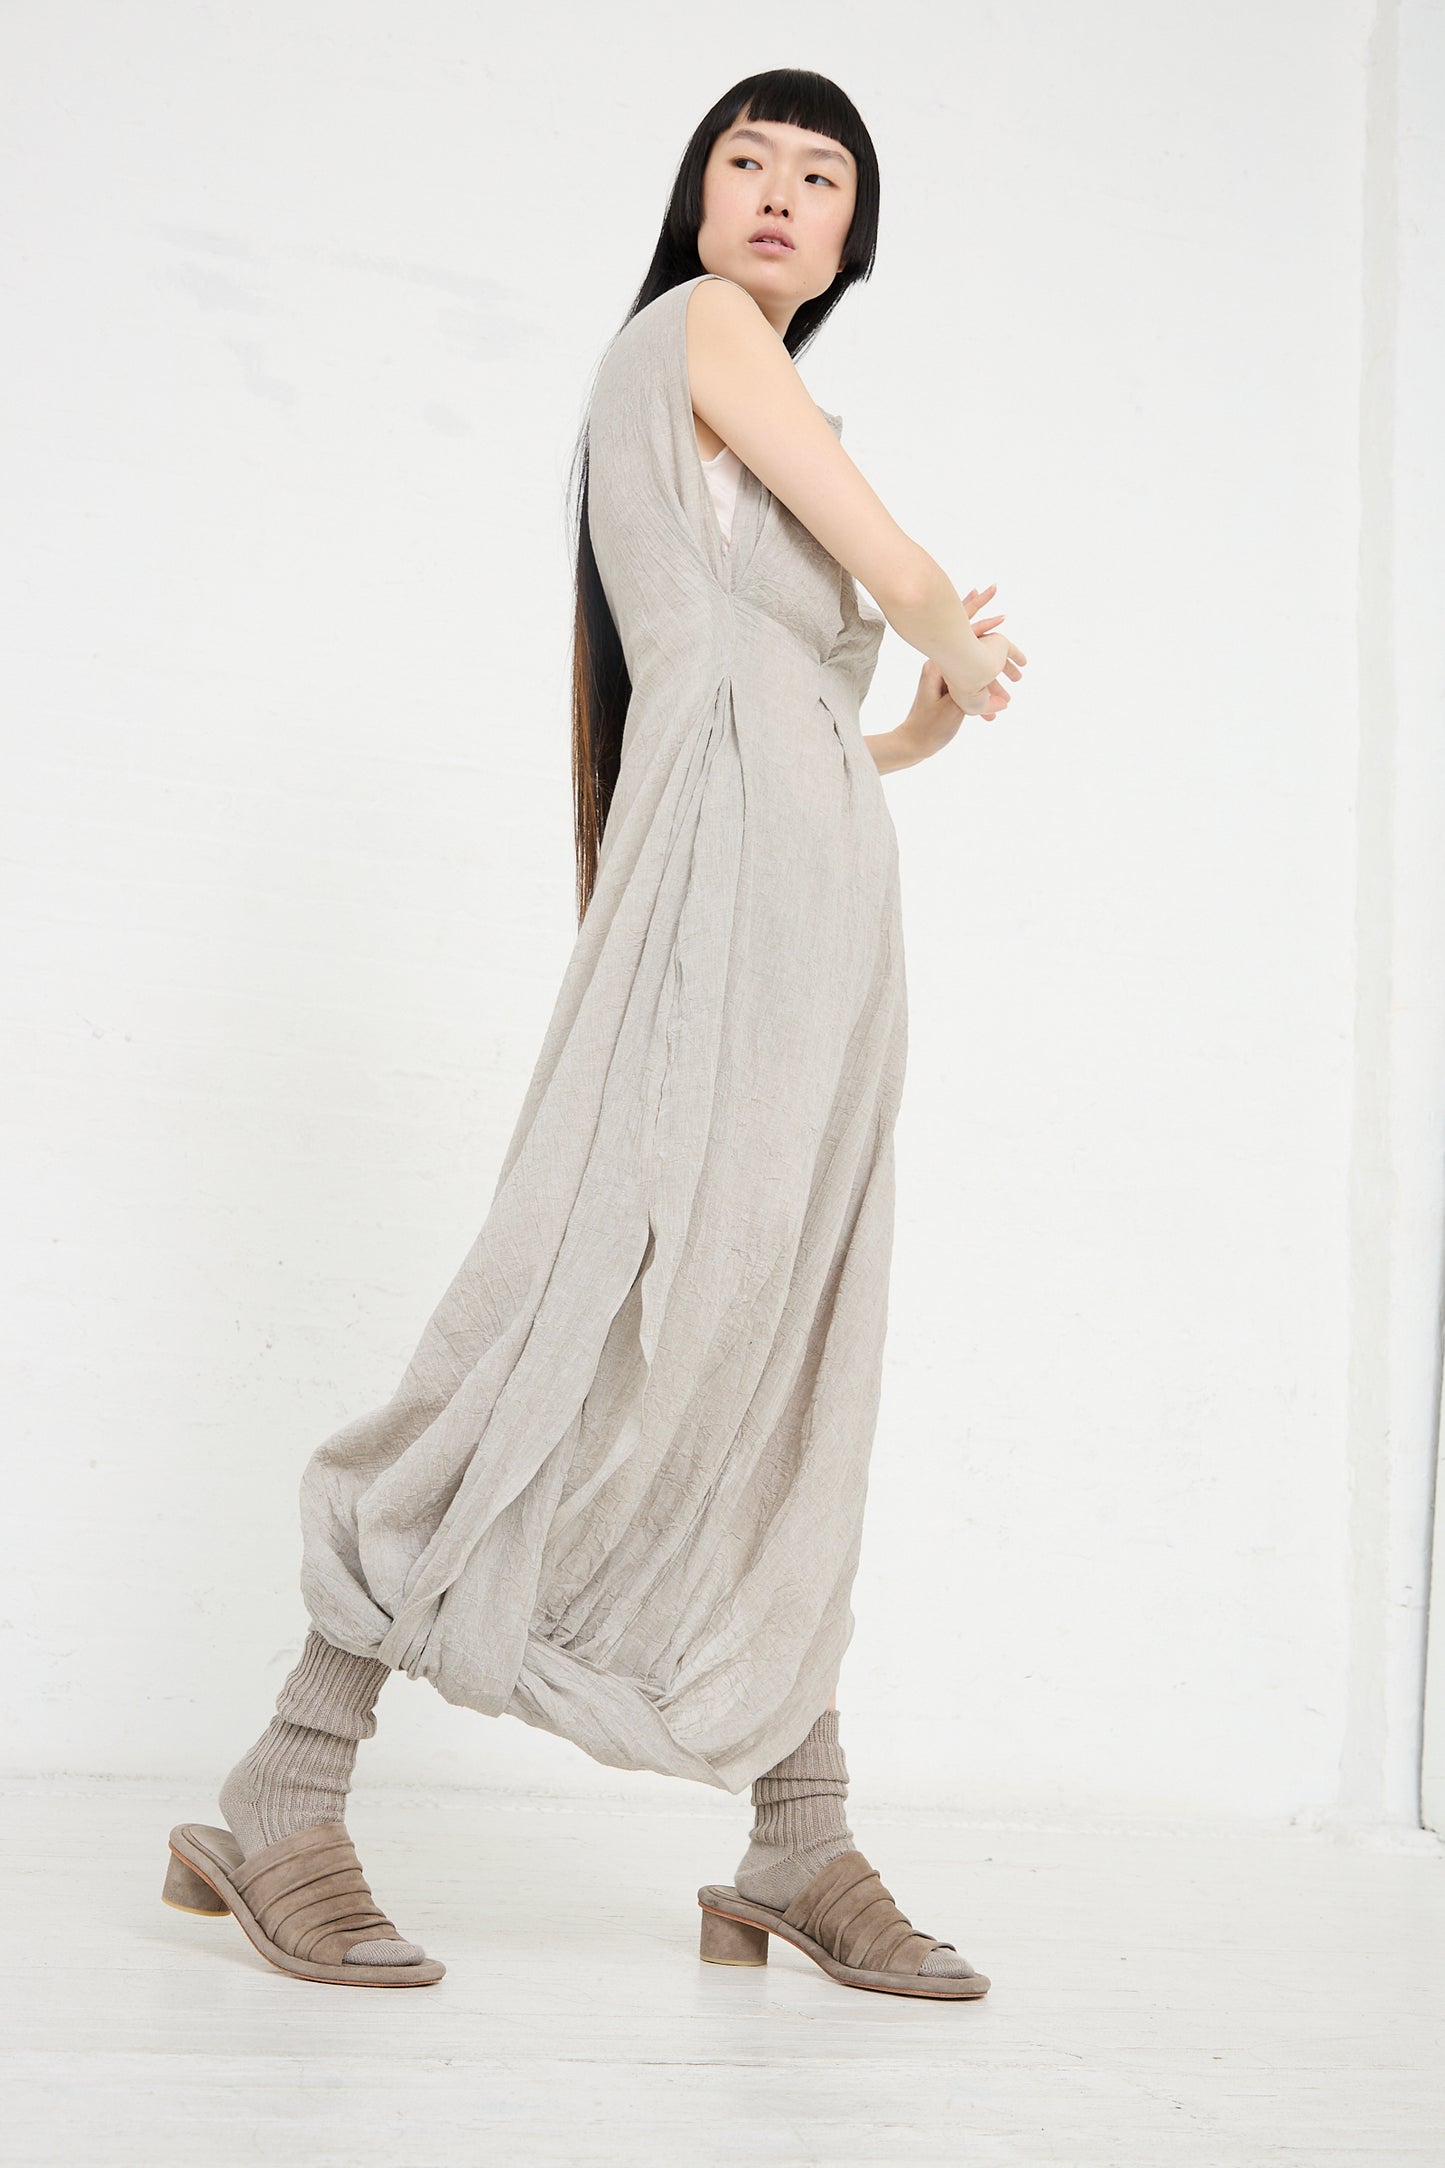 A woman in a flowing beige Lauren Manoogian Gauze Twist Dress in Ash and brown shoes poses in a white studio.